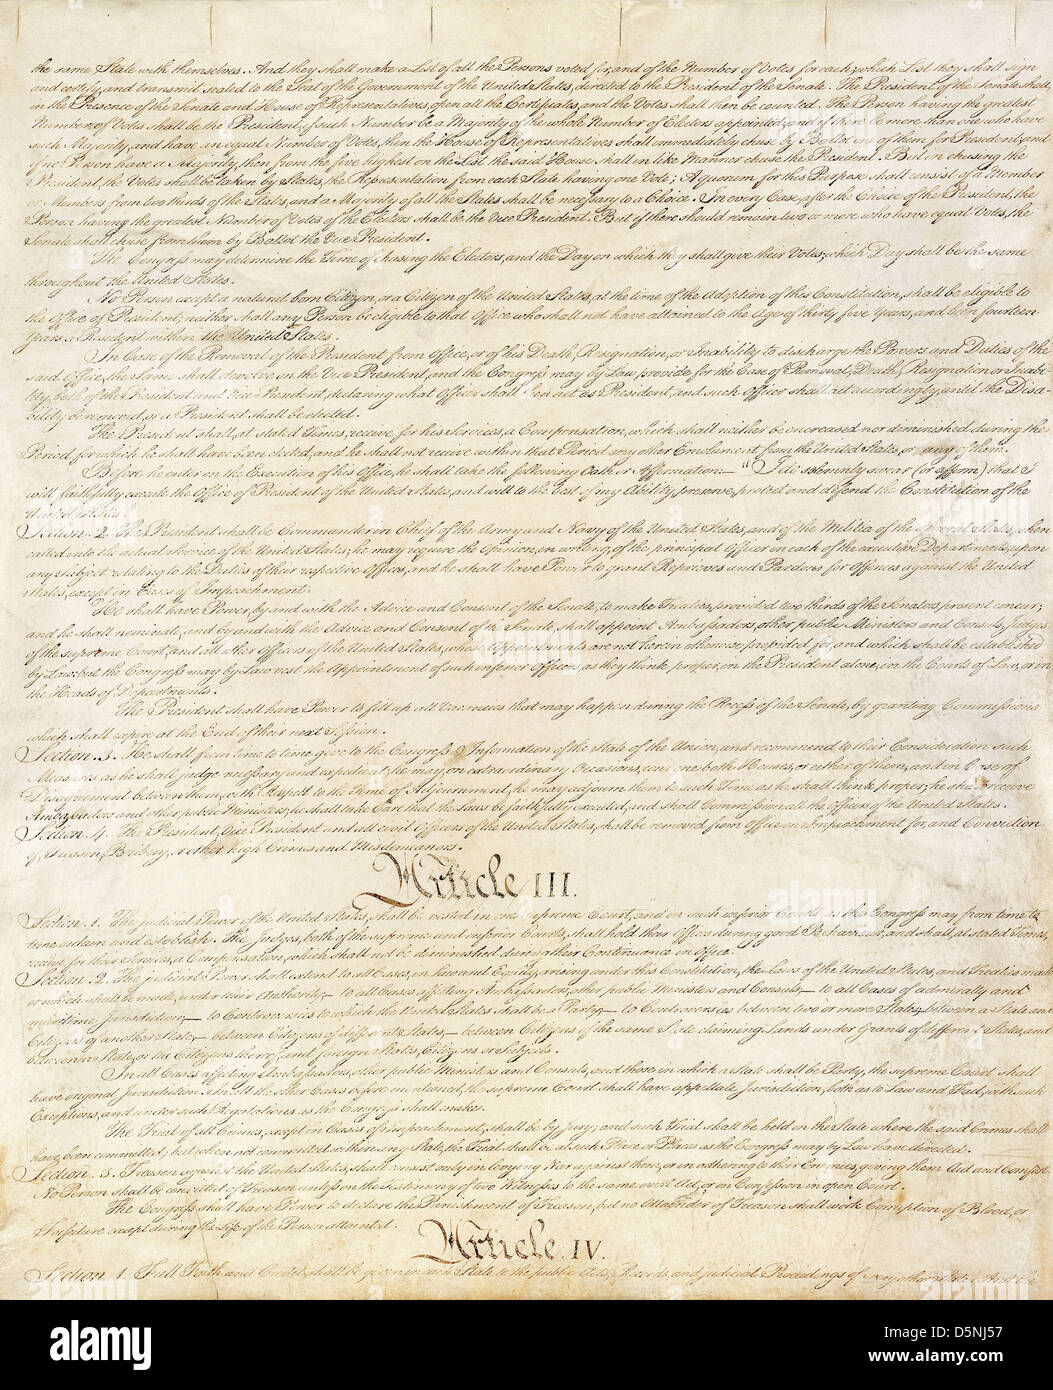 Third page of Constitution of the United States. National Archives and Records Administration, Washington, D.C. Stock Photo